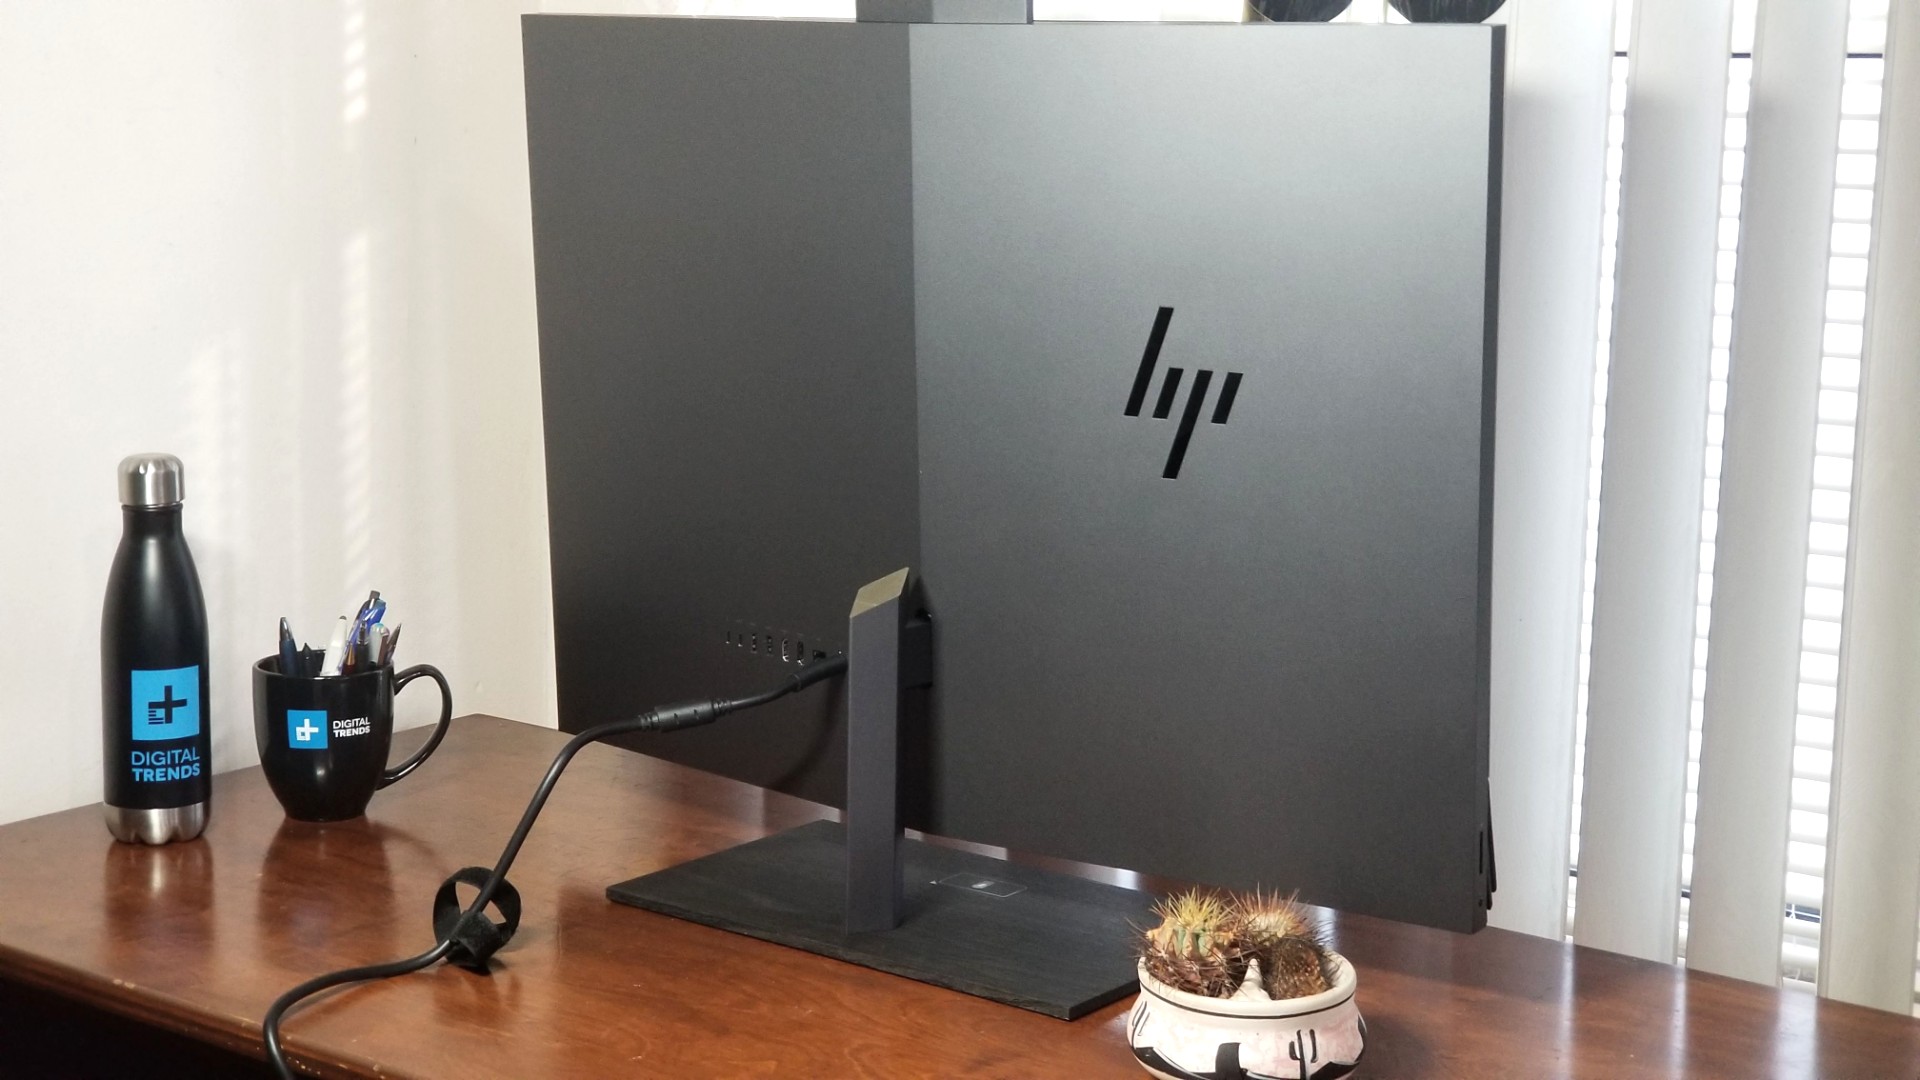 HP Envy 32-inch All-in-One Review: near perfection - Reviewed